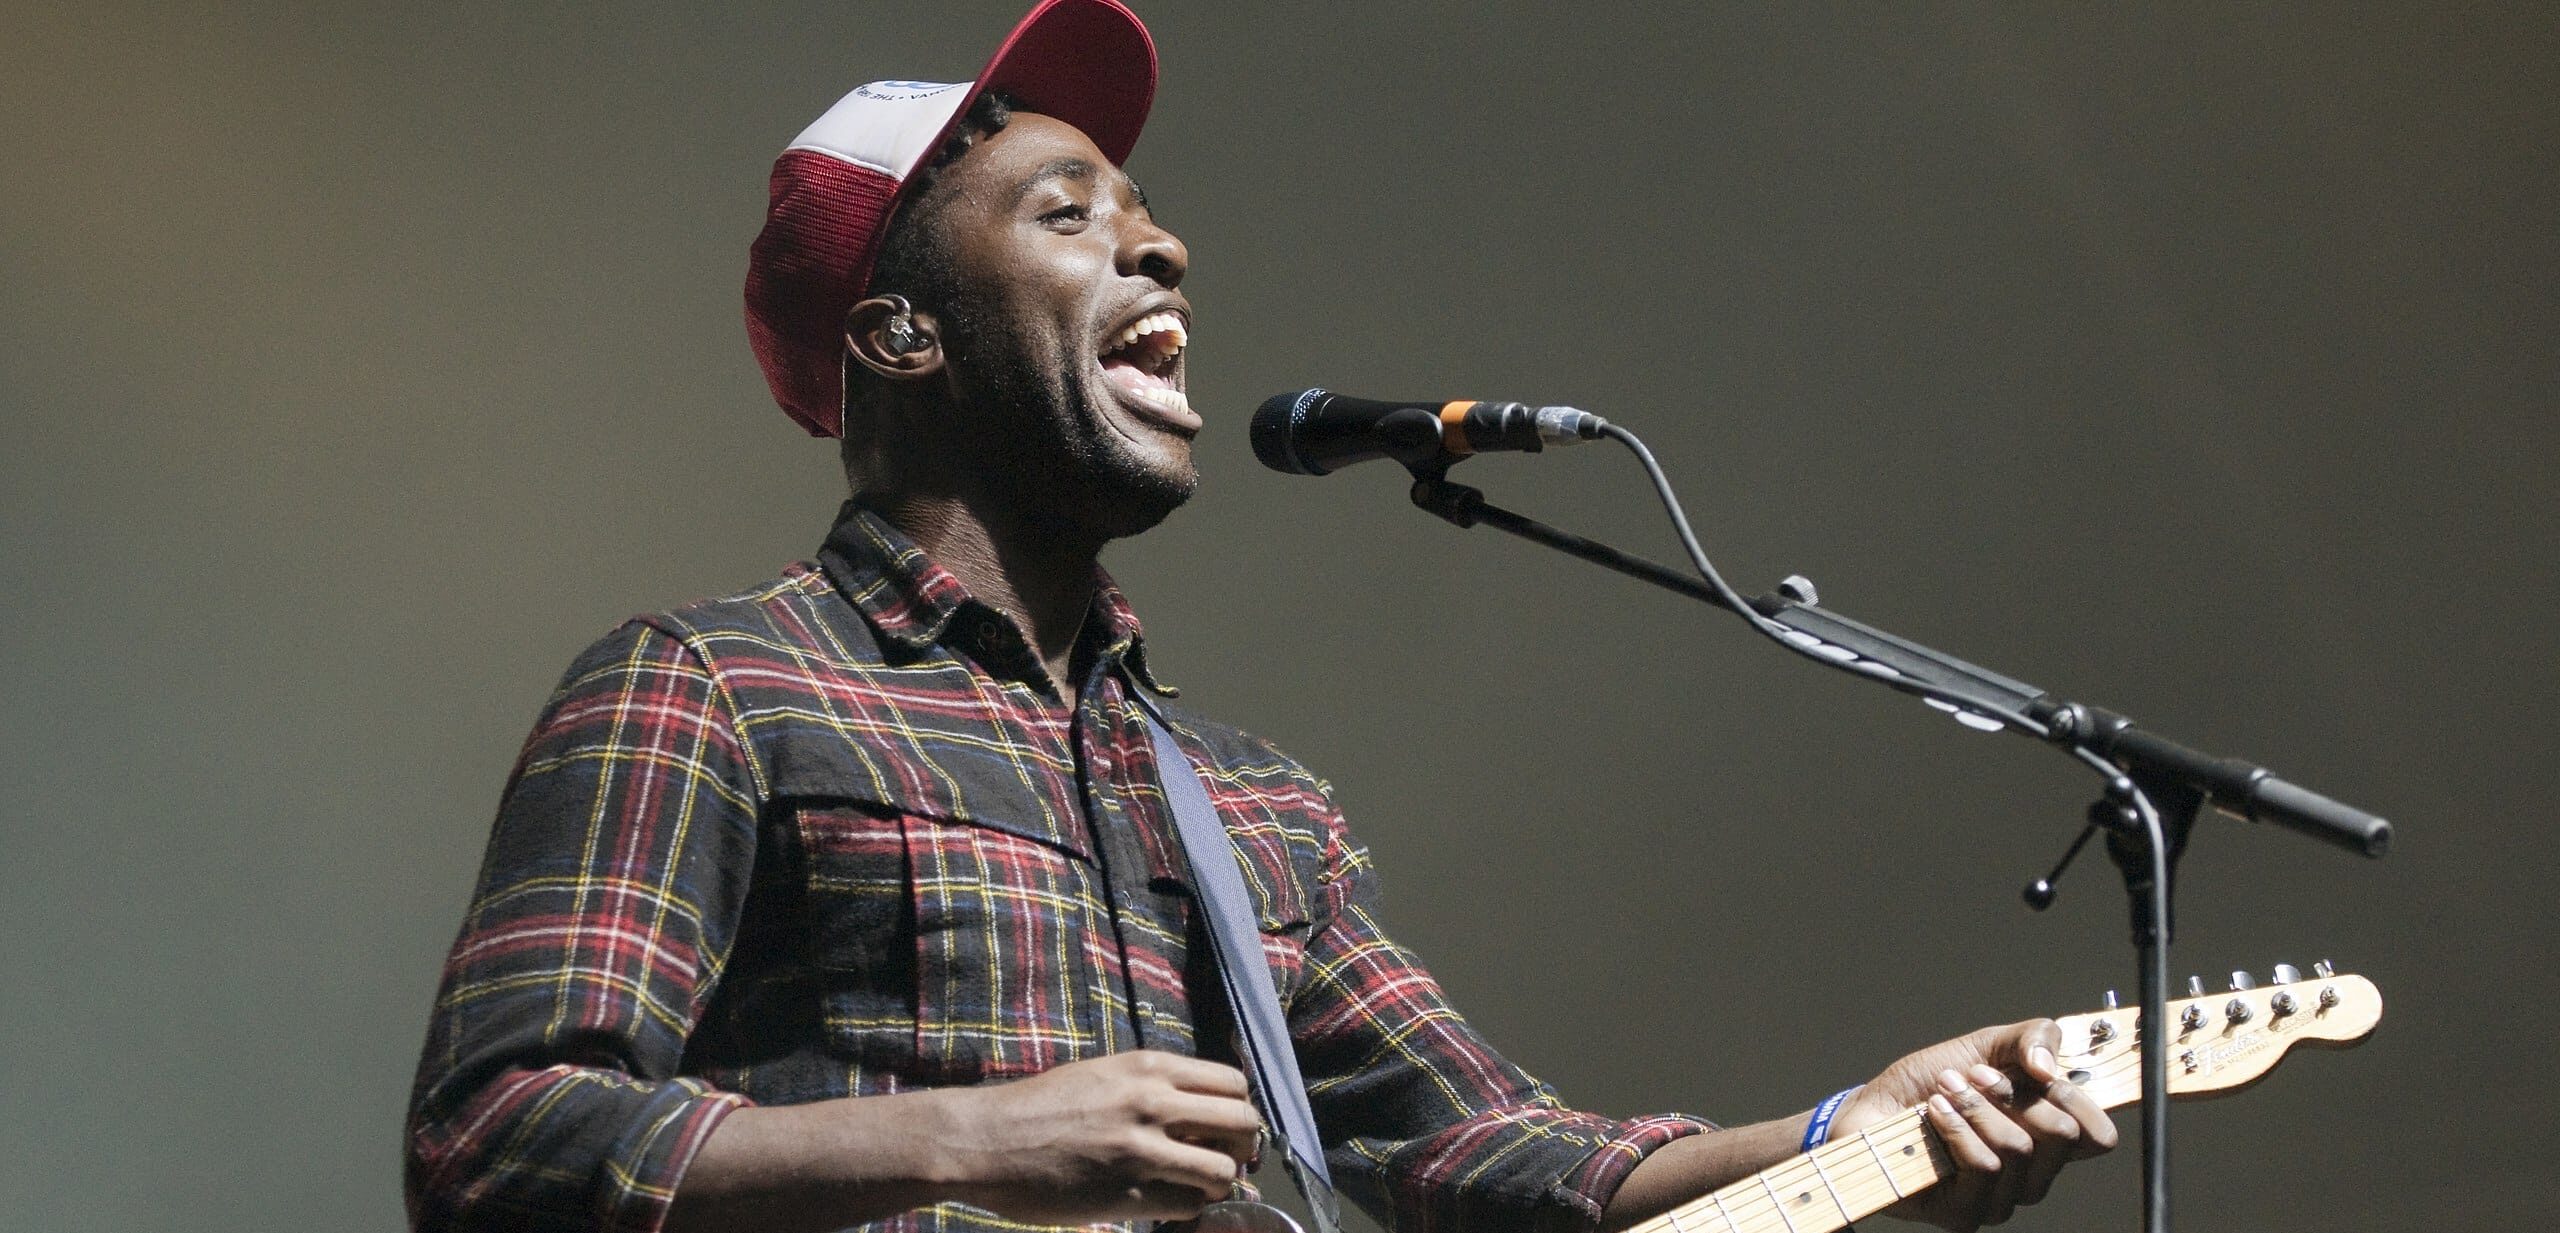 Bloc Party's Kele Okereke performing on stage. (Credit: livepict)